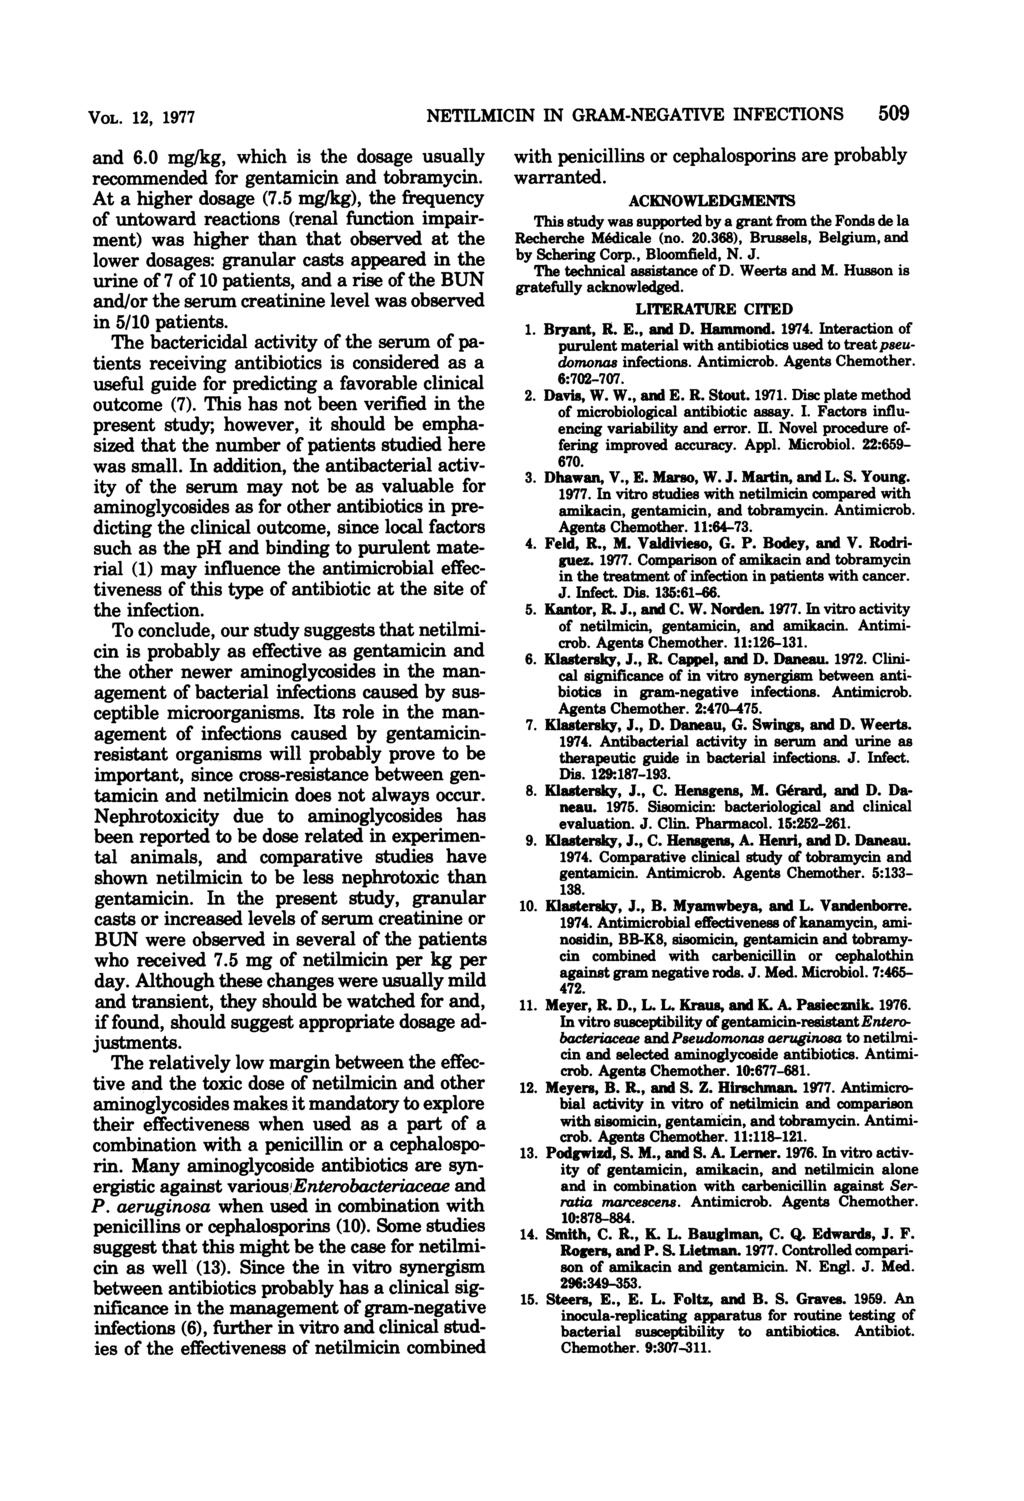 VOL. 12, 1977 and 6. mg/kg, which is the dosage usually recommended for gentamicin and tobramycin. At a higher dosage (7.